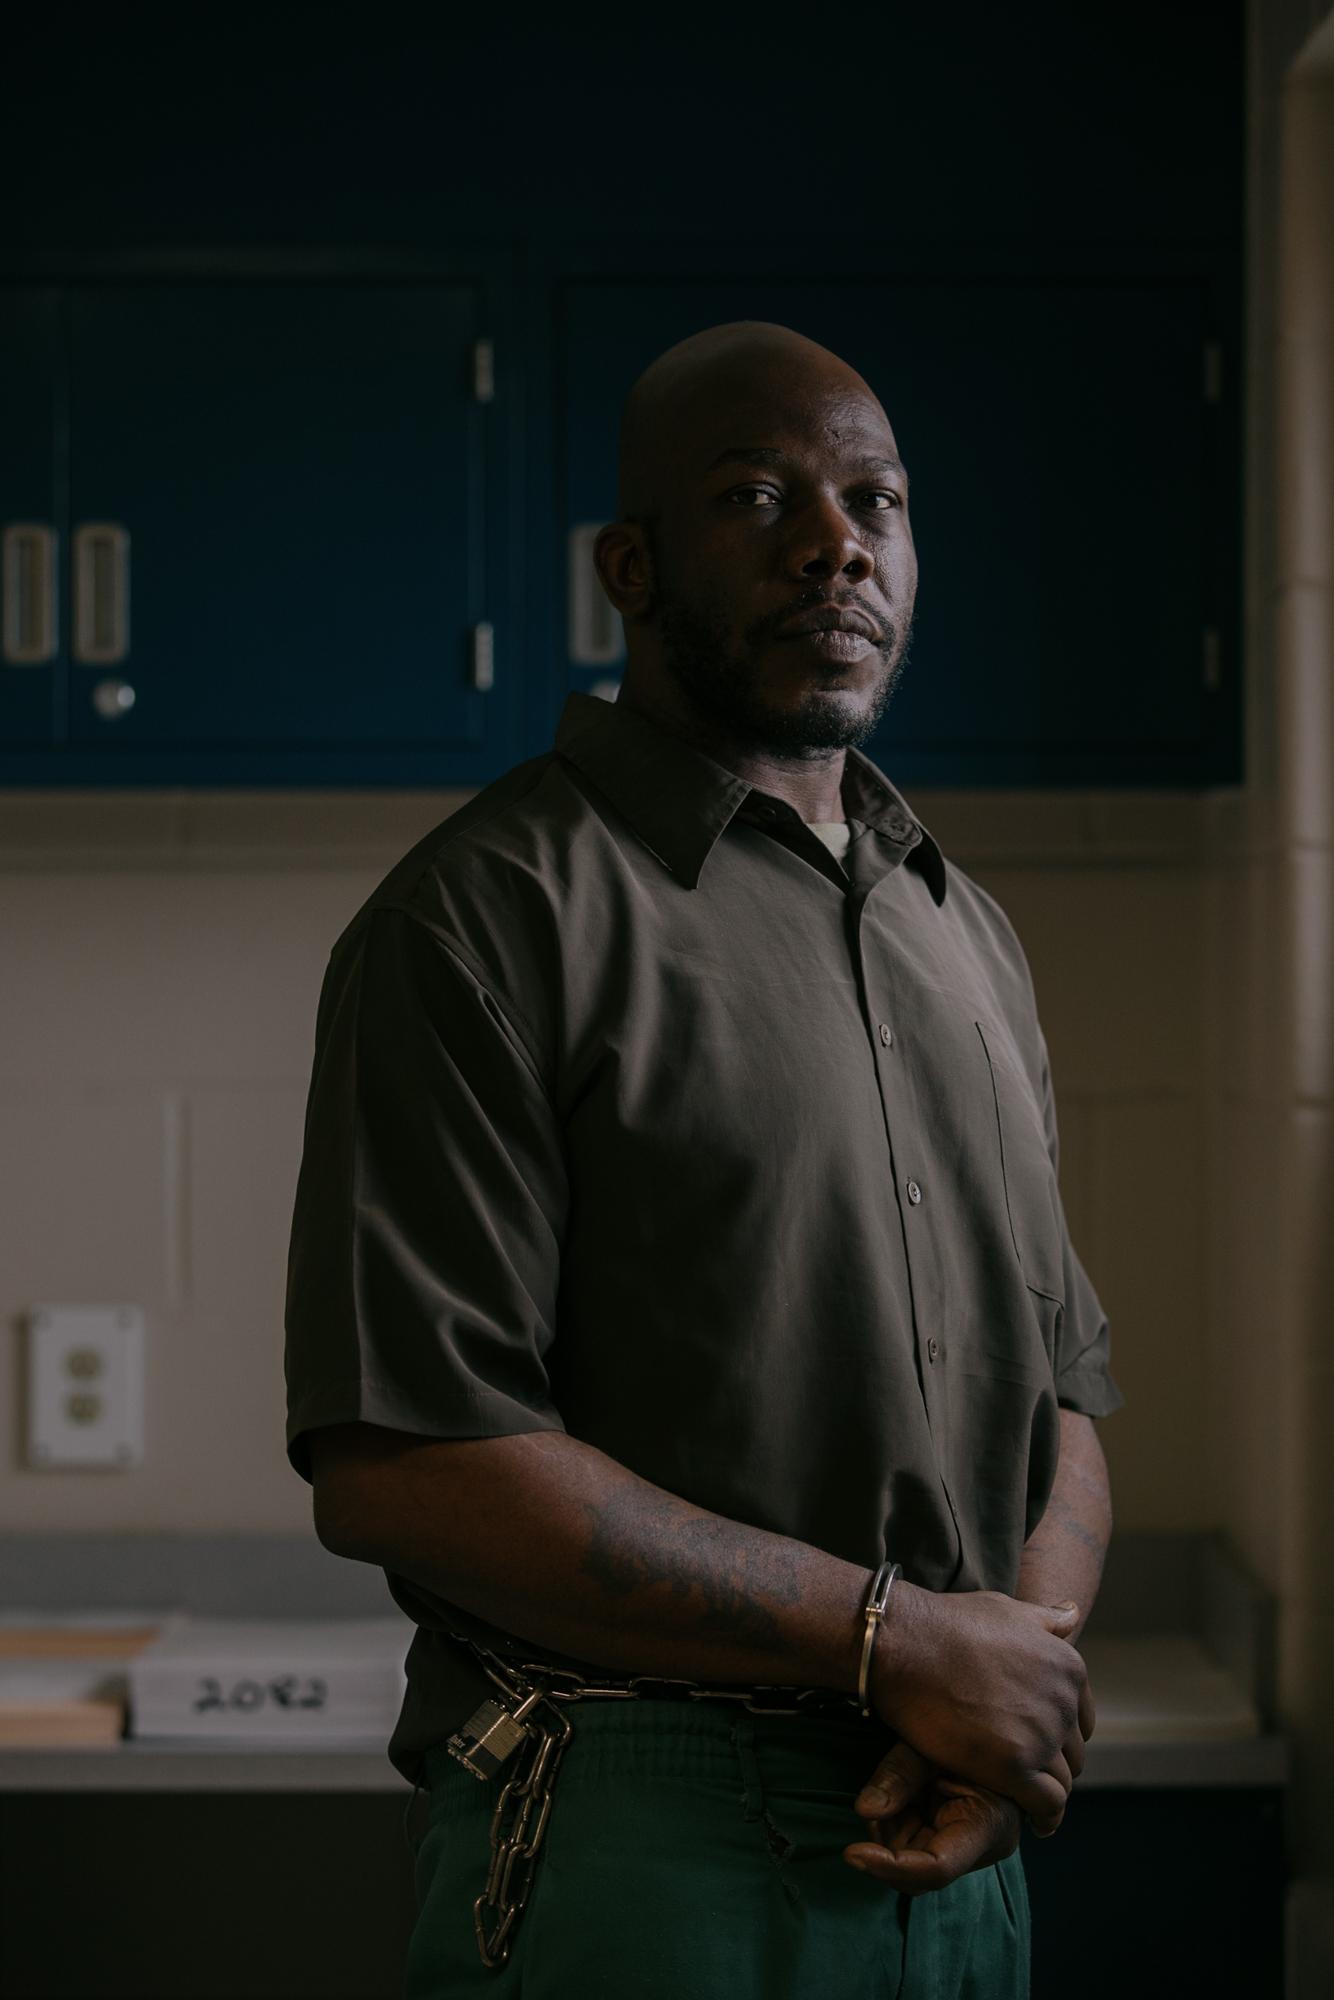 PORTRAITS - Michael J. Jones, an inmate at Five Points Correctional...